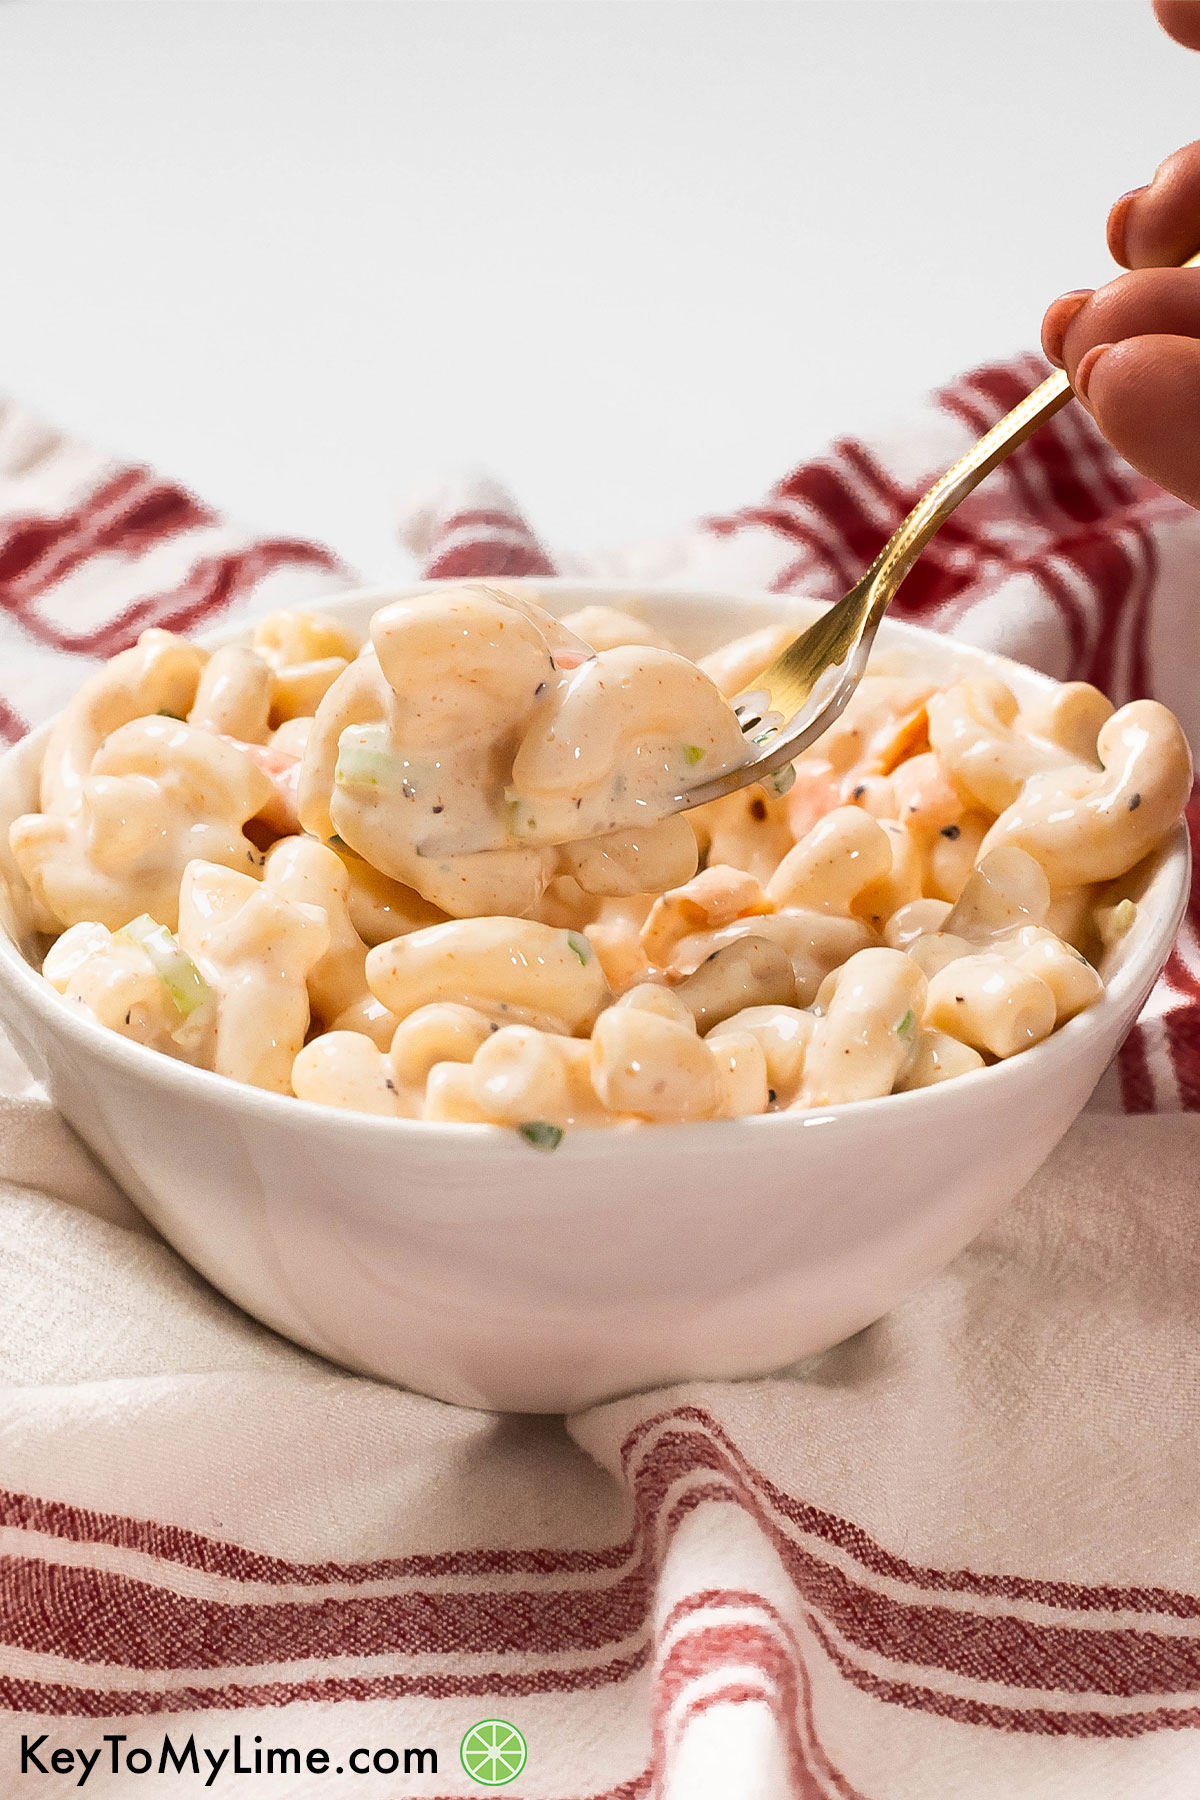 A fork full of creamy macaroni salad with red napkin in the backgrond.